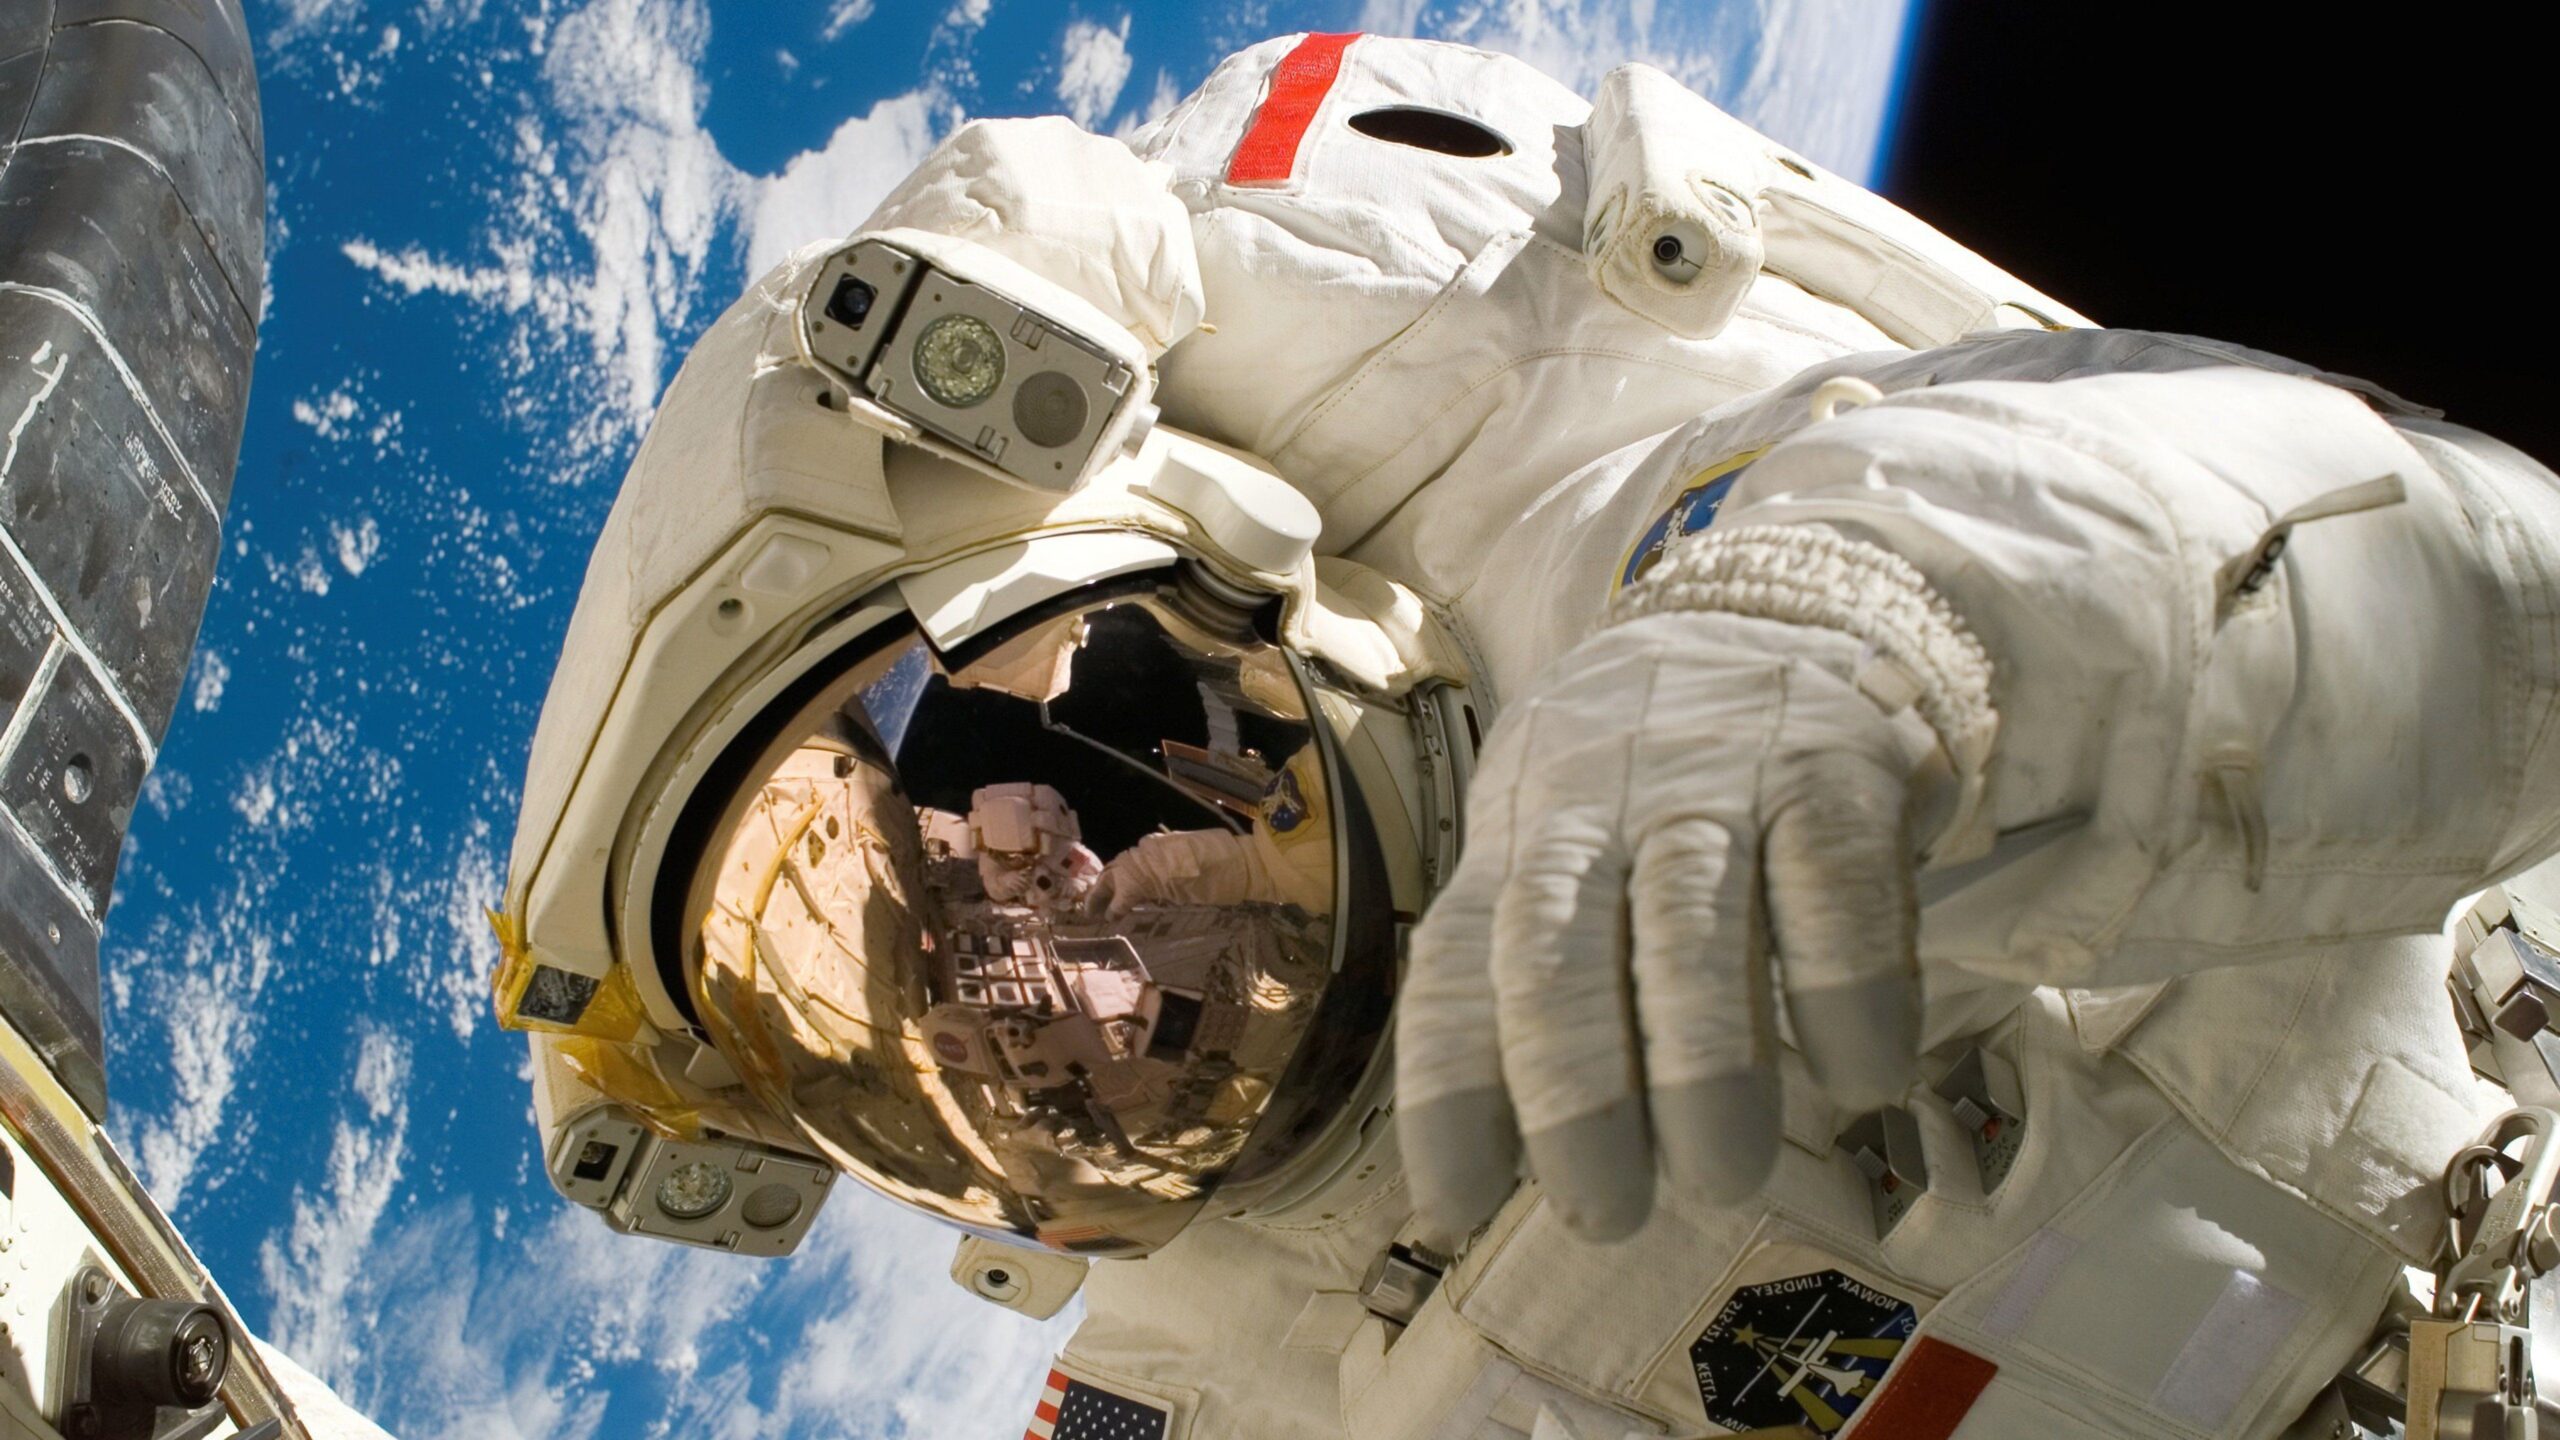 Astronaut, 2K Others, k Wallpapers, Wallpaper, Backgrounds, Photos and